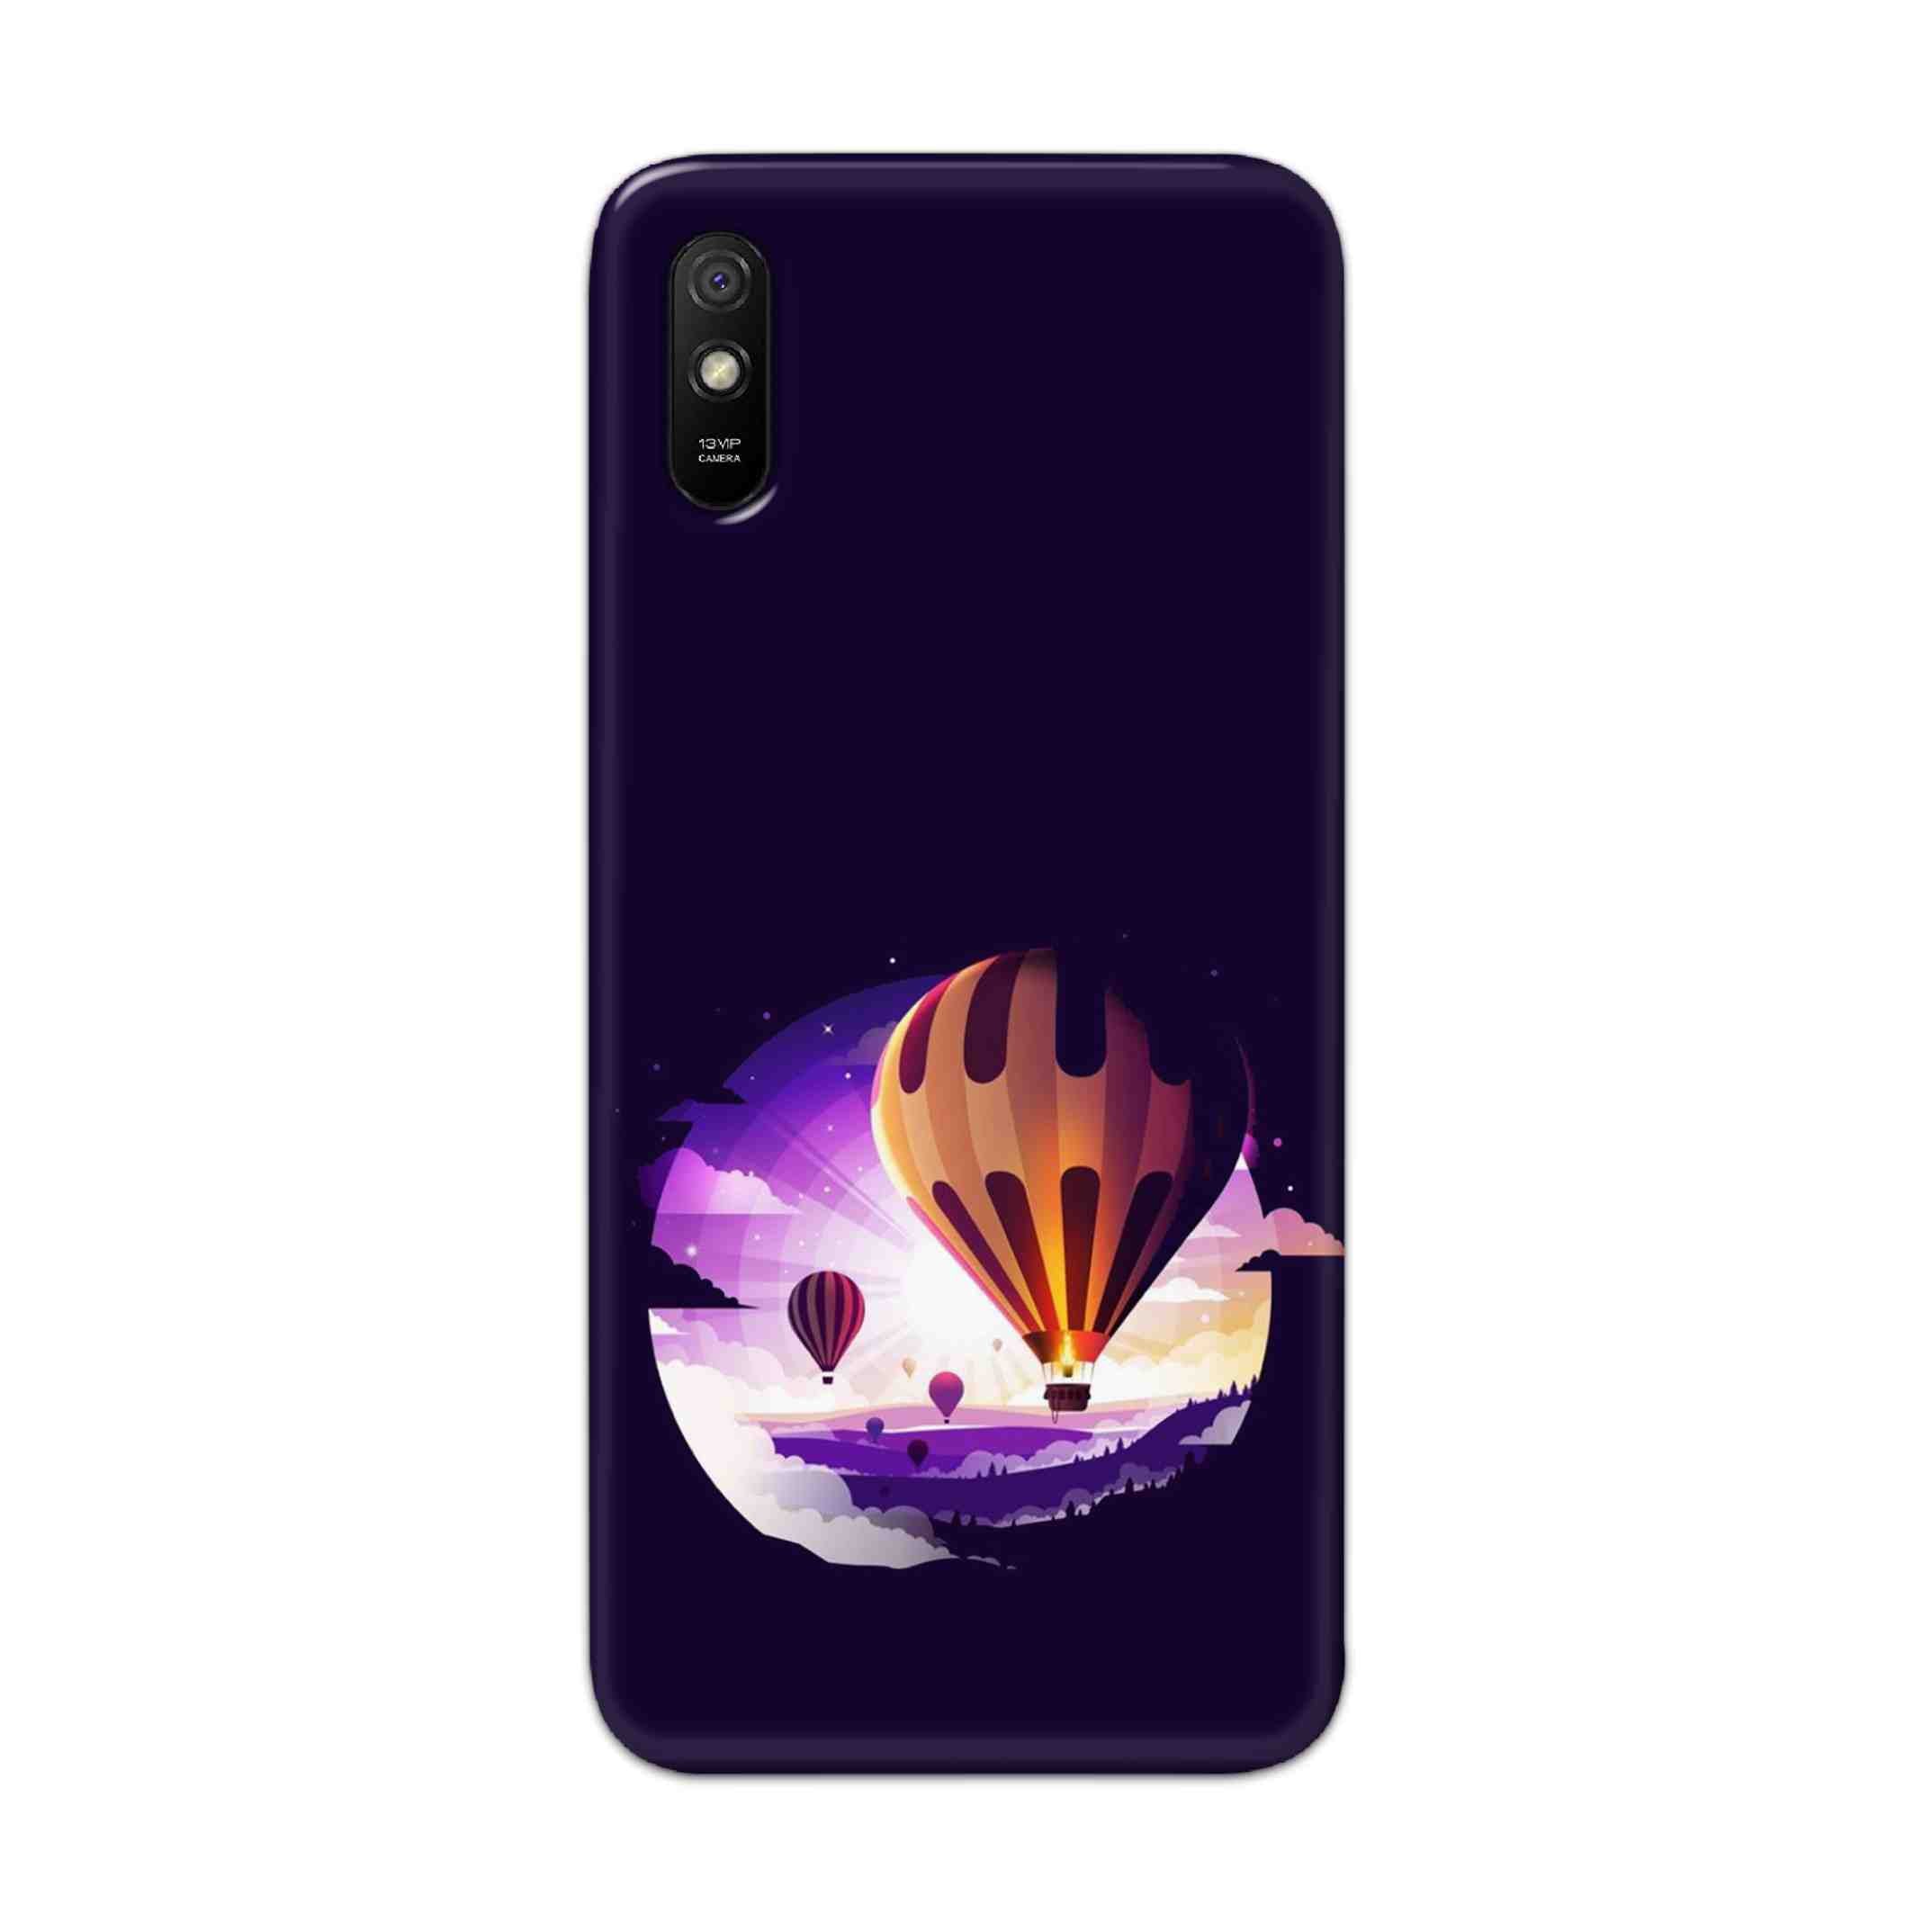 Buy Ballon Hard Back Mobile Phone Case Cover For Redmi 9A Online